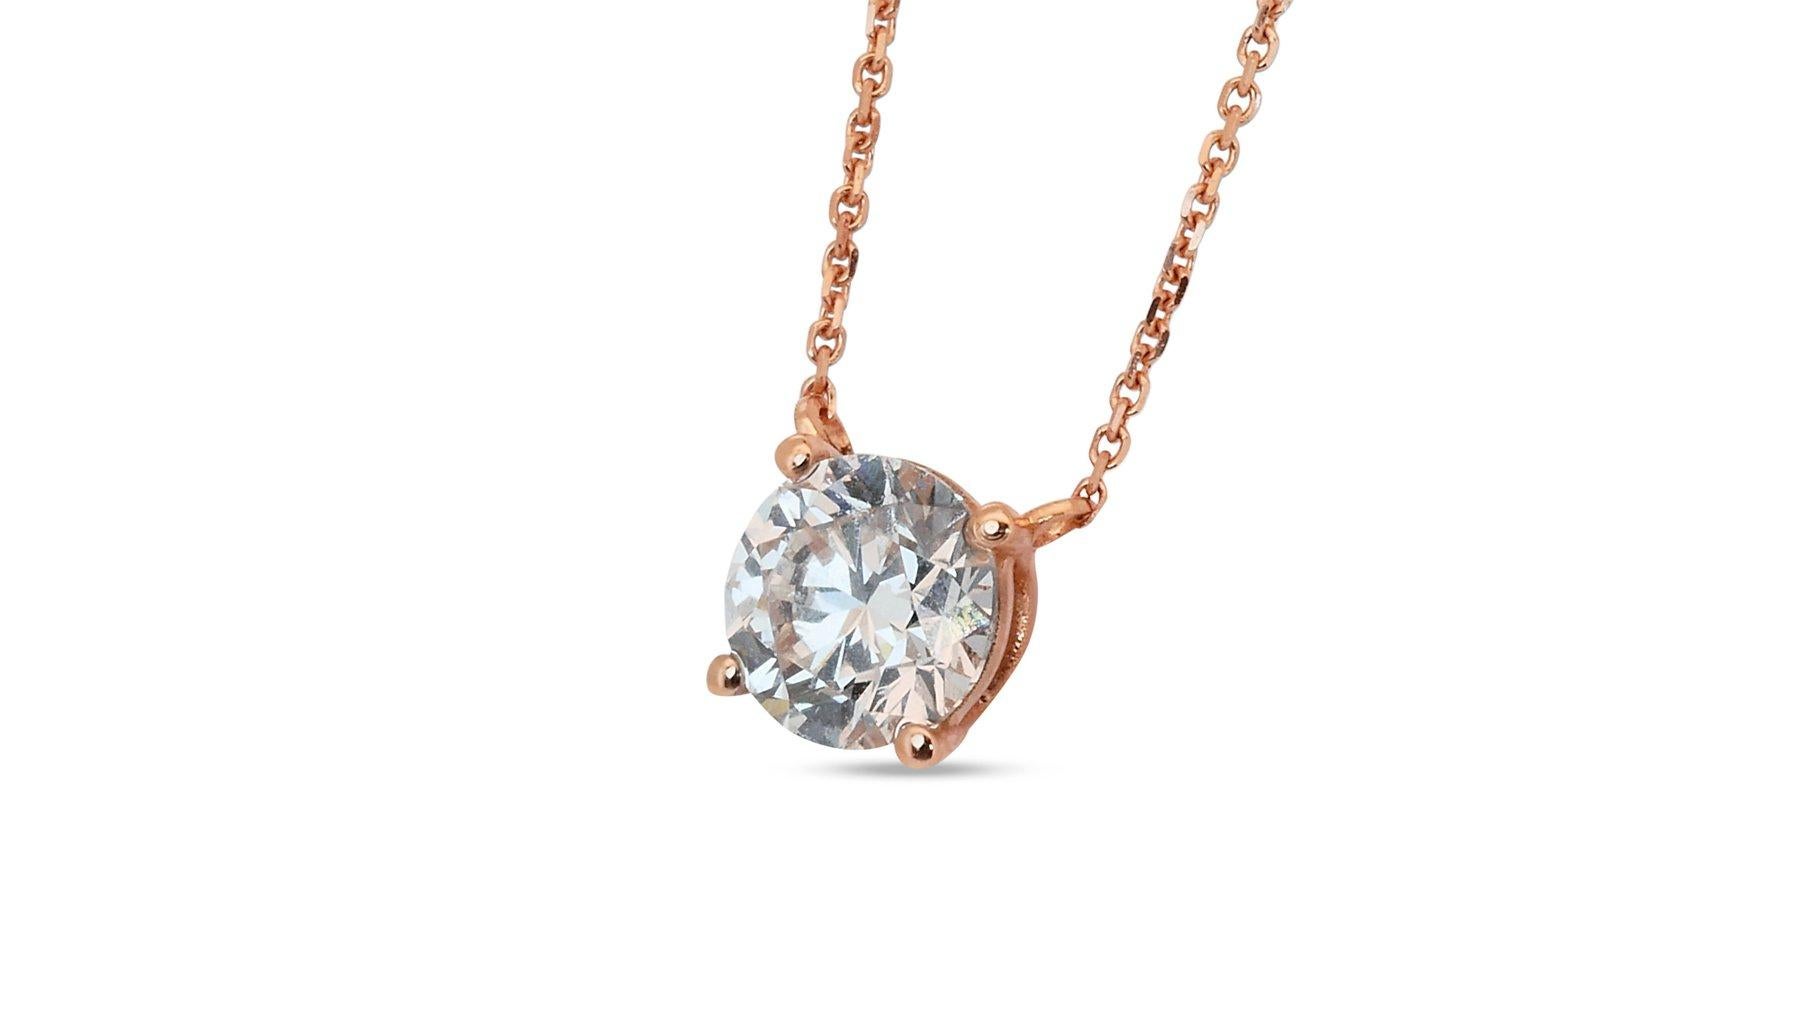 Beautiful 18K Rose Gold Ideal Cut Natural Diamond Necklace w/1.04ct - GIA Certified

This necklace is a captivating expression of luxury, showcasing a dazzling 1.04 carat natural diamond as its centerpiece. The delicate chain flatters any neckline,